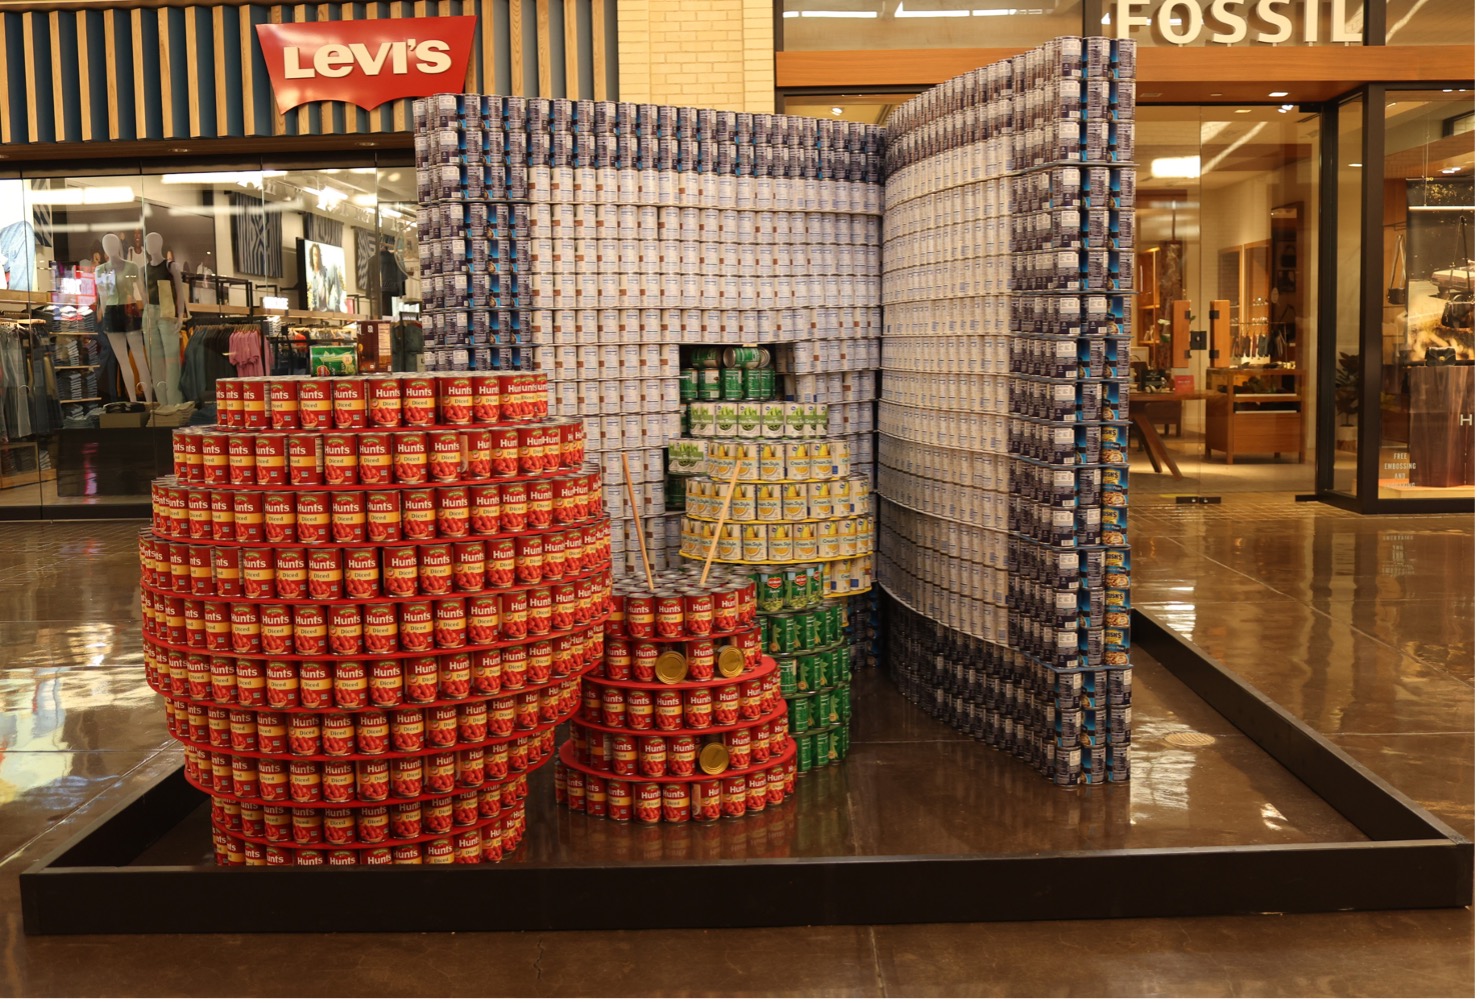 Canstruction returns to NorthPark